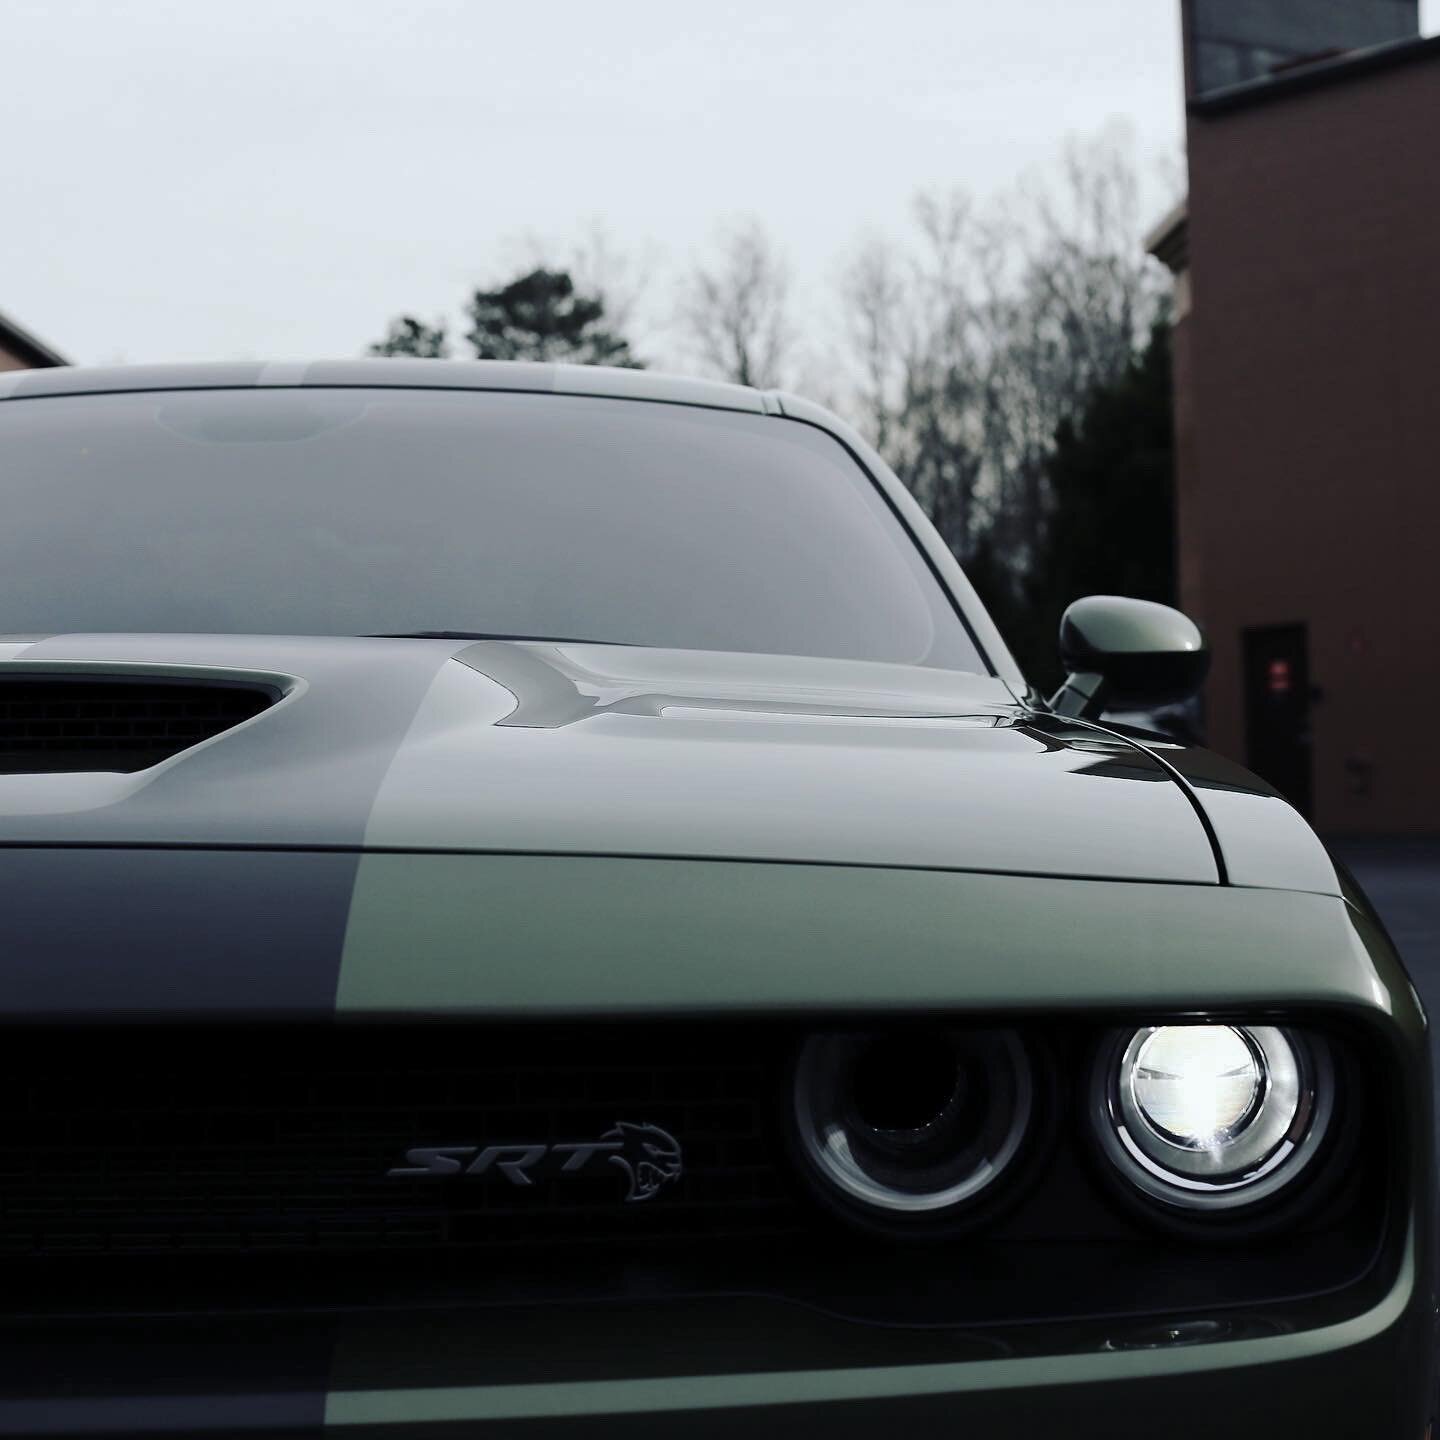 Protect your car from the elements and ceramic coat your vehicle.

#defynecars #vinylwrapping #ceramiccoating #paintprotectionfilm #windowtinting #cars #dodge #dodgehellcat #hellcat #greenmachine #americanmuscle @dodgeofficial